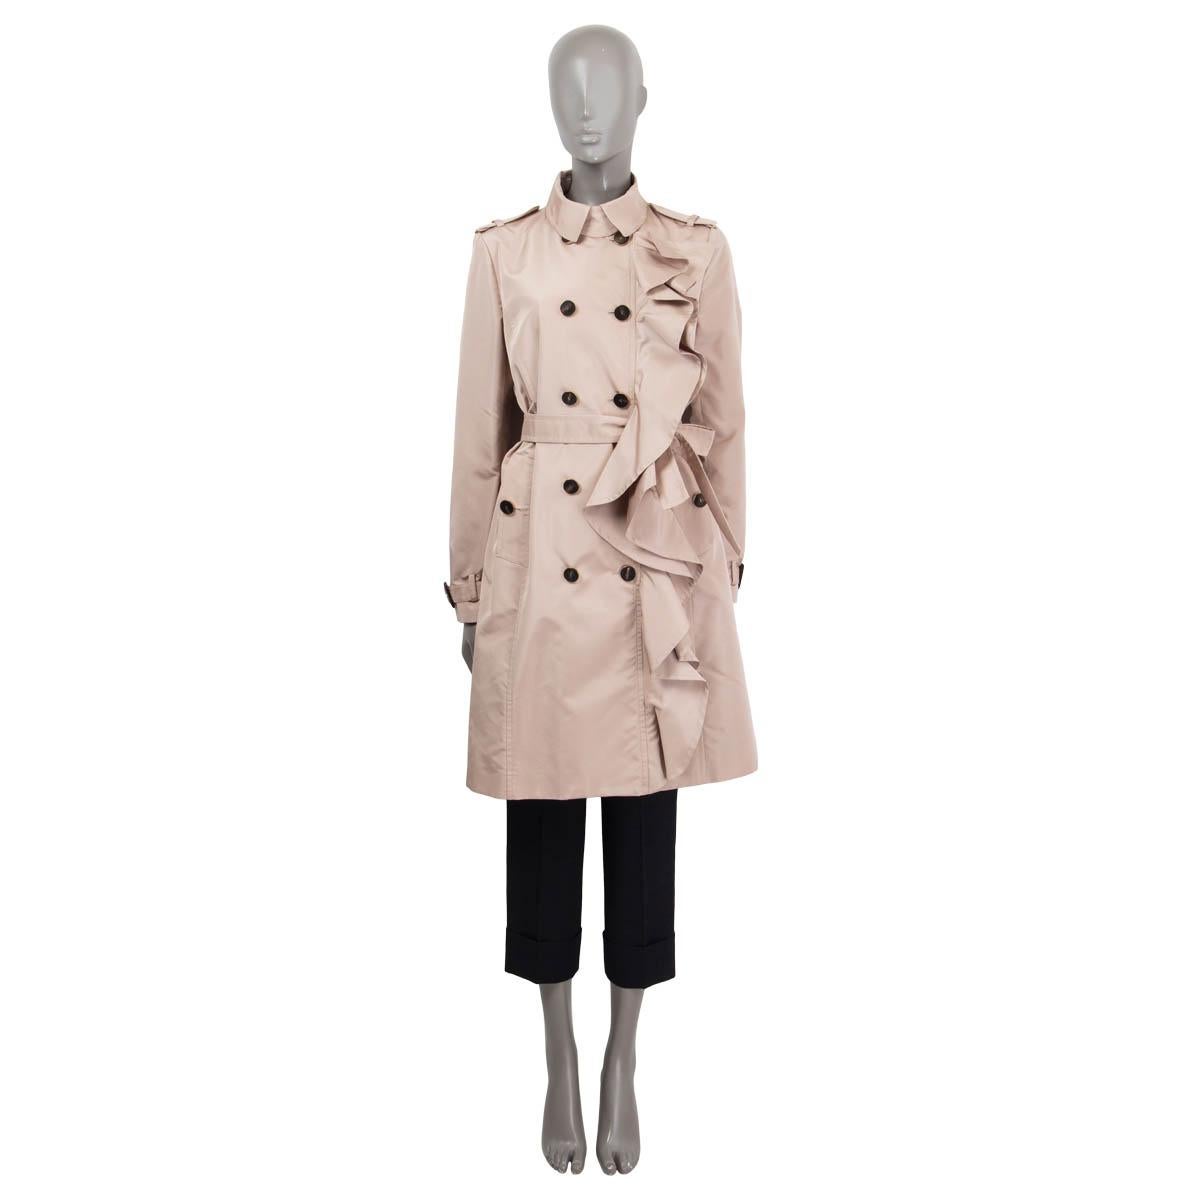 100% authentic Valentino ruffled double breasted trench coat in dusty rose silk (52%) and polyester (48%). Features epaulettes at the shoulders and the cuffs. Has two buttoned slit pockets, a detachable belt and belt loops. Opens with a hook at the